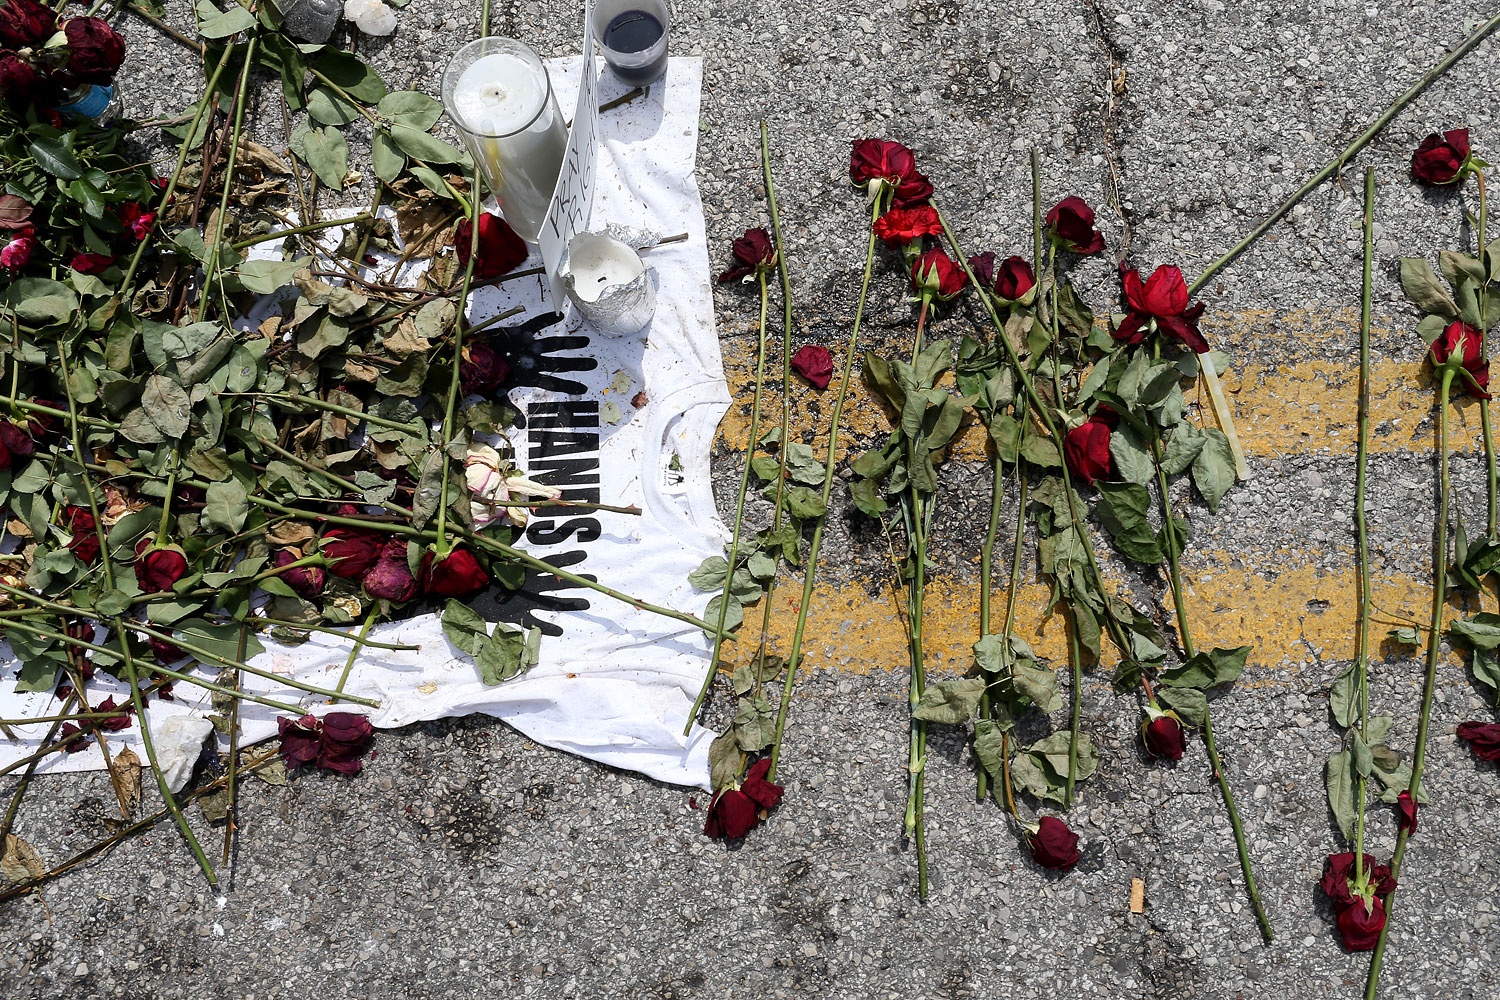 Roses are seen in a memorial setup for Michael Brown on the spot where his body lay after he was shot by police, Aug. 22, 2014 in Ferguson, Missouri. (Joe Raedle—Getty Images)